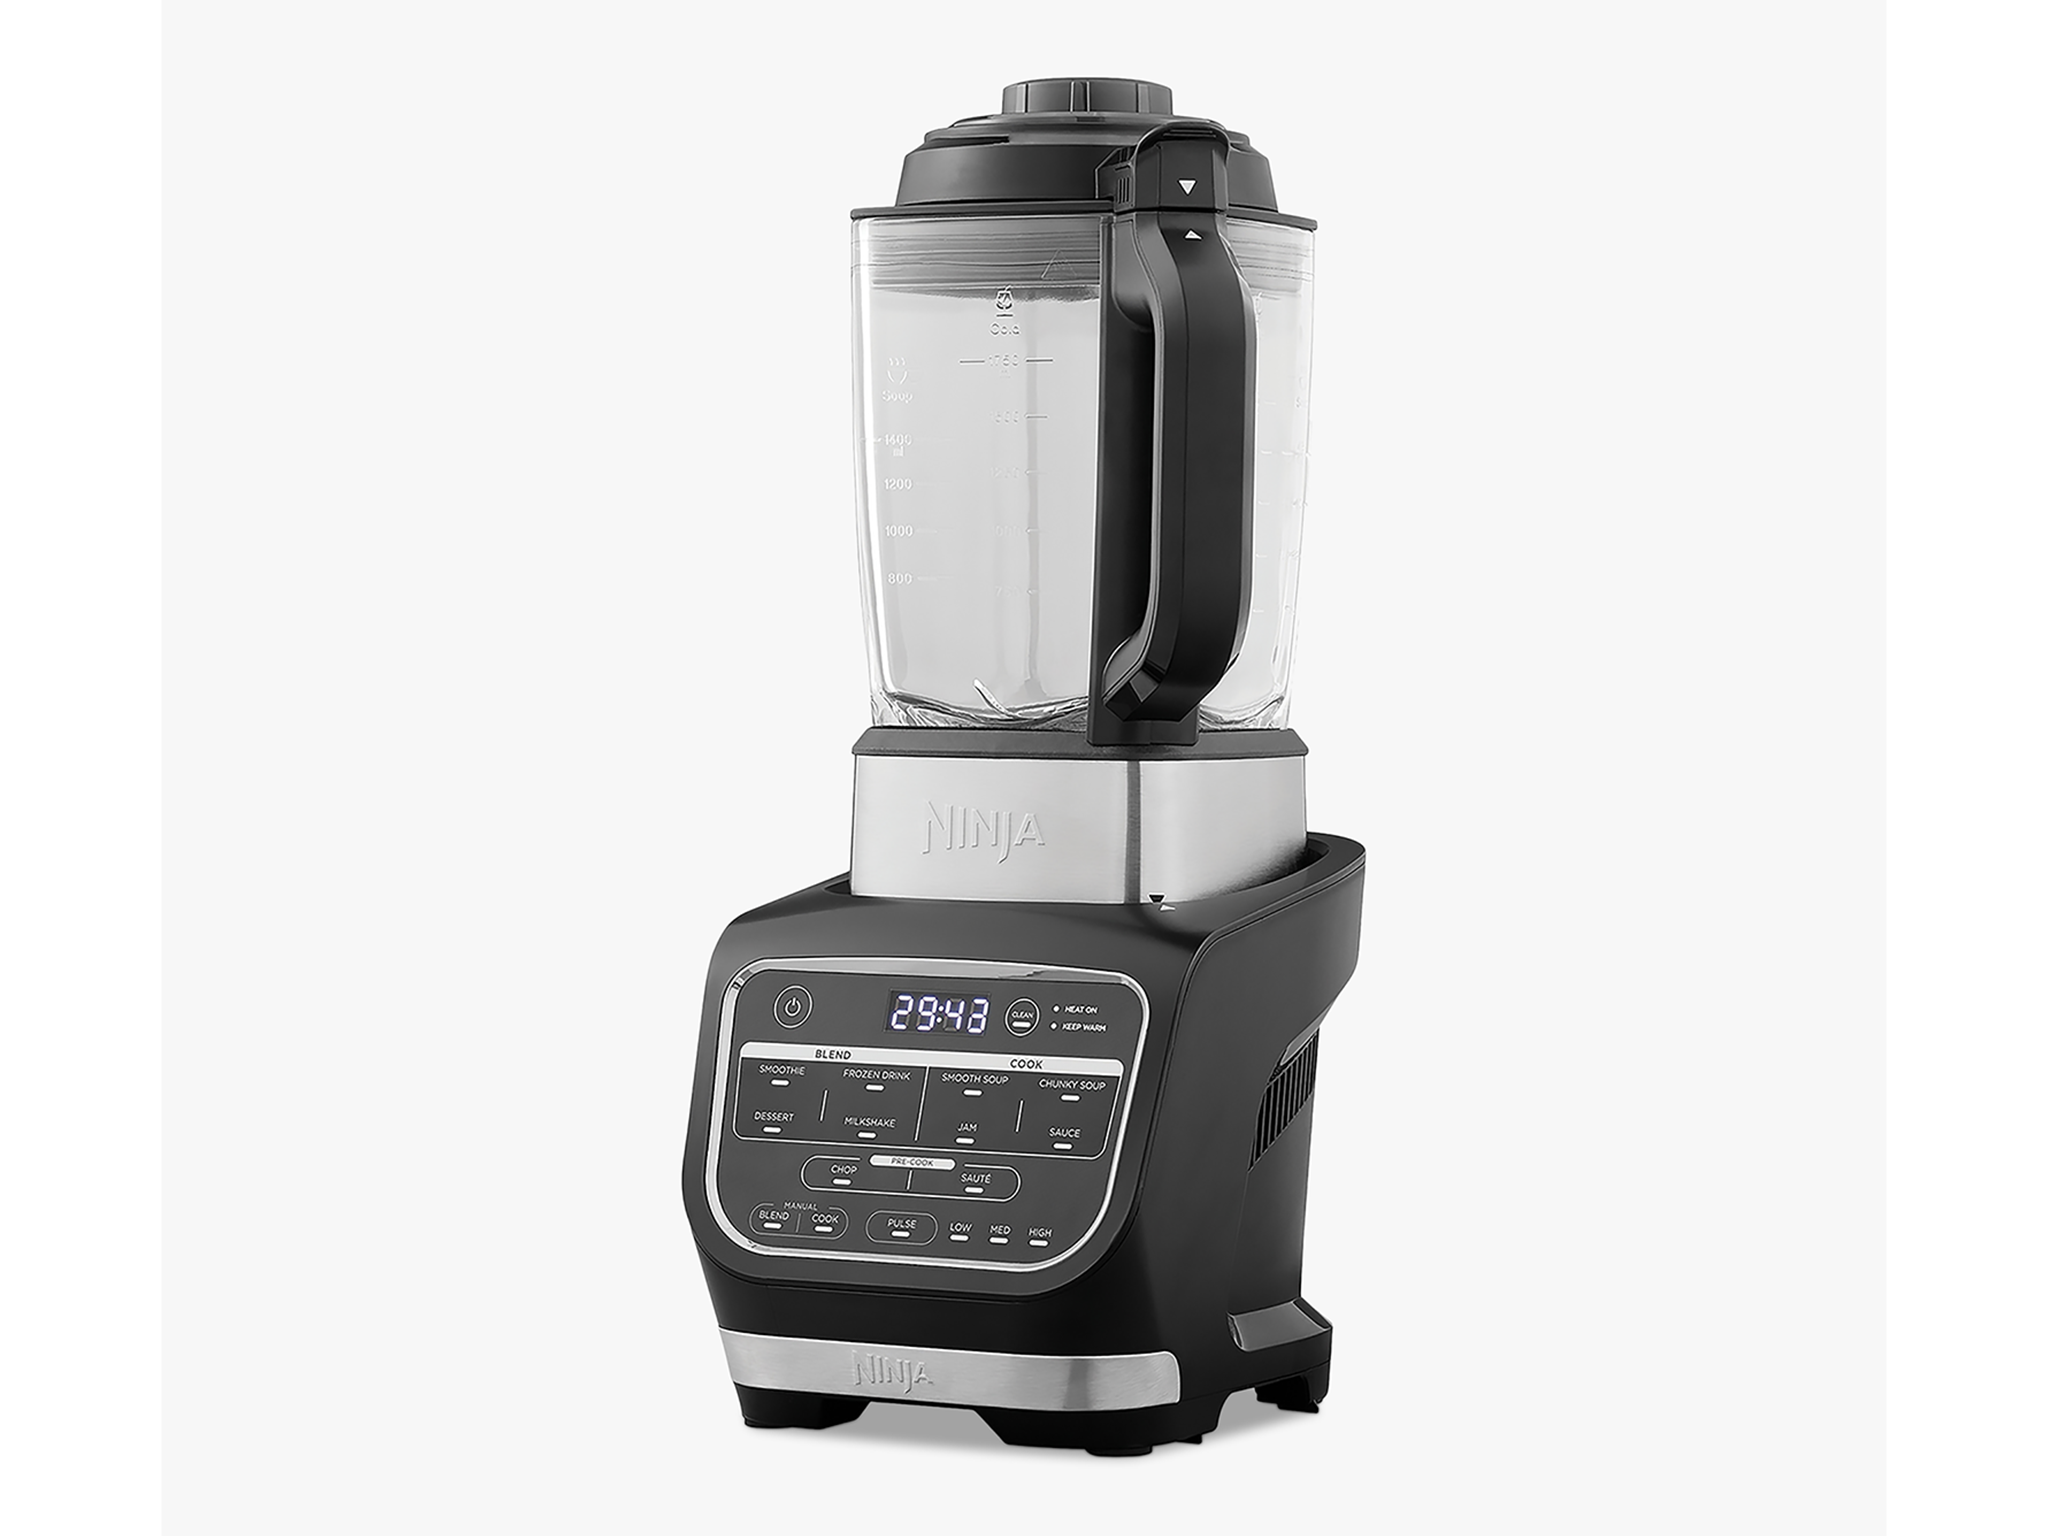 Beginners Guide to using a Soup Maker full review: do they really